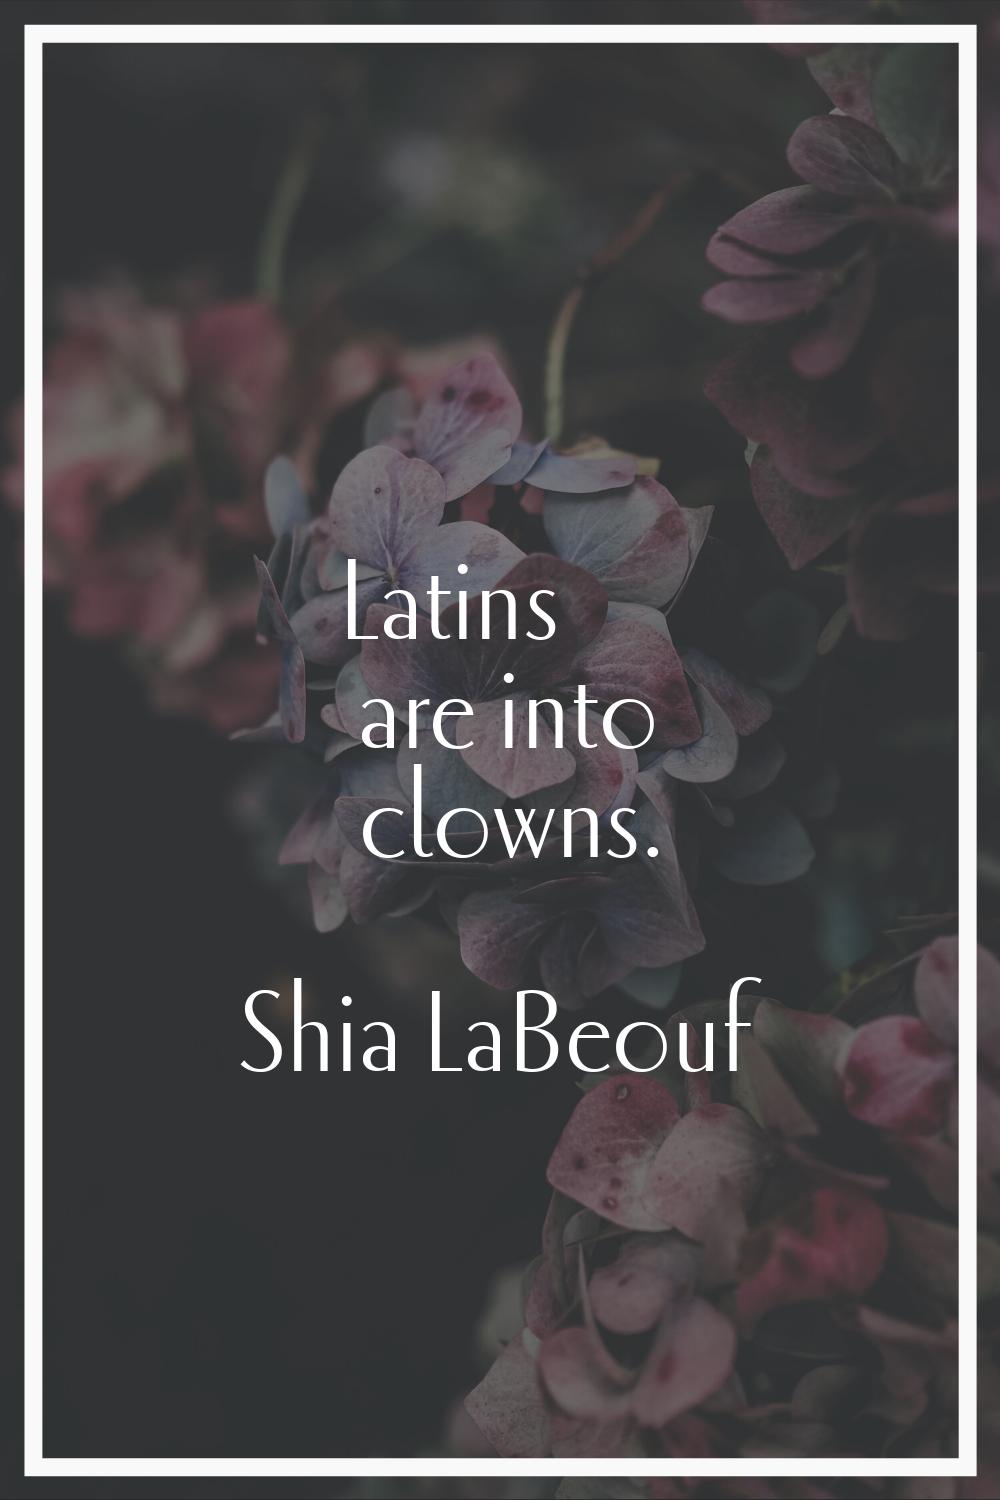 Latins are into clowns.